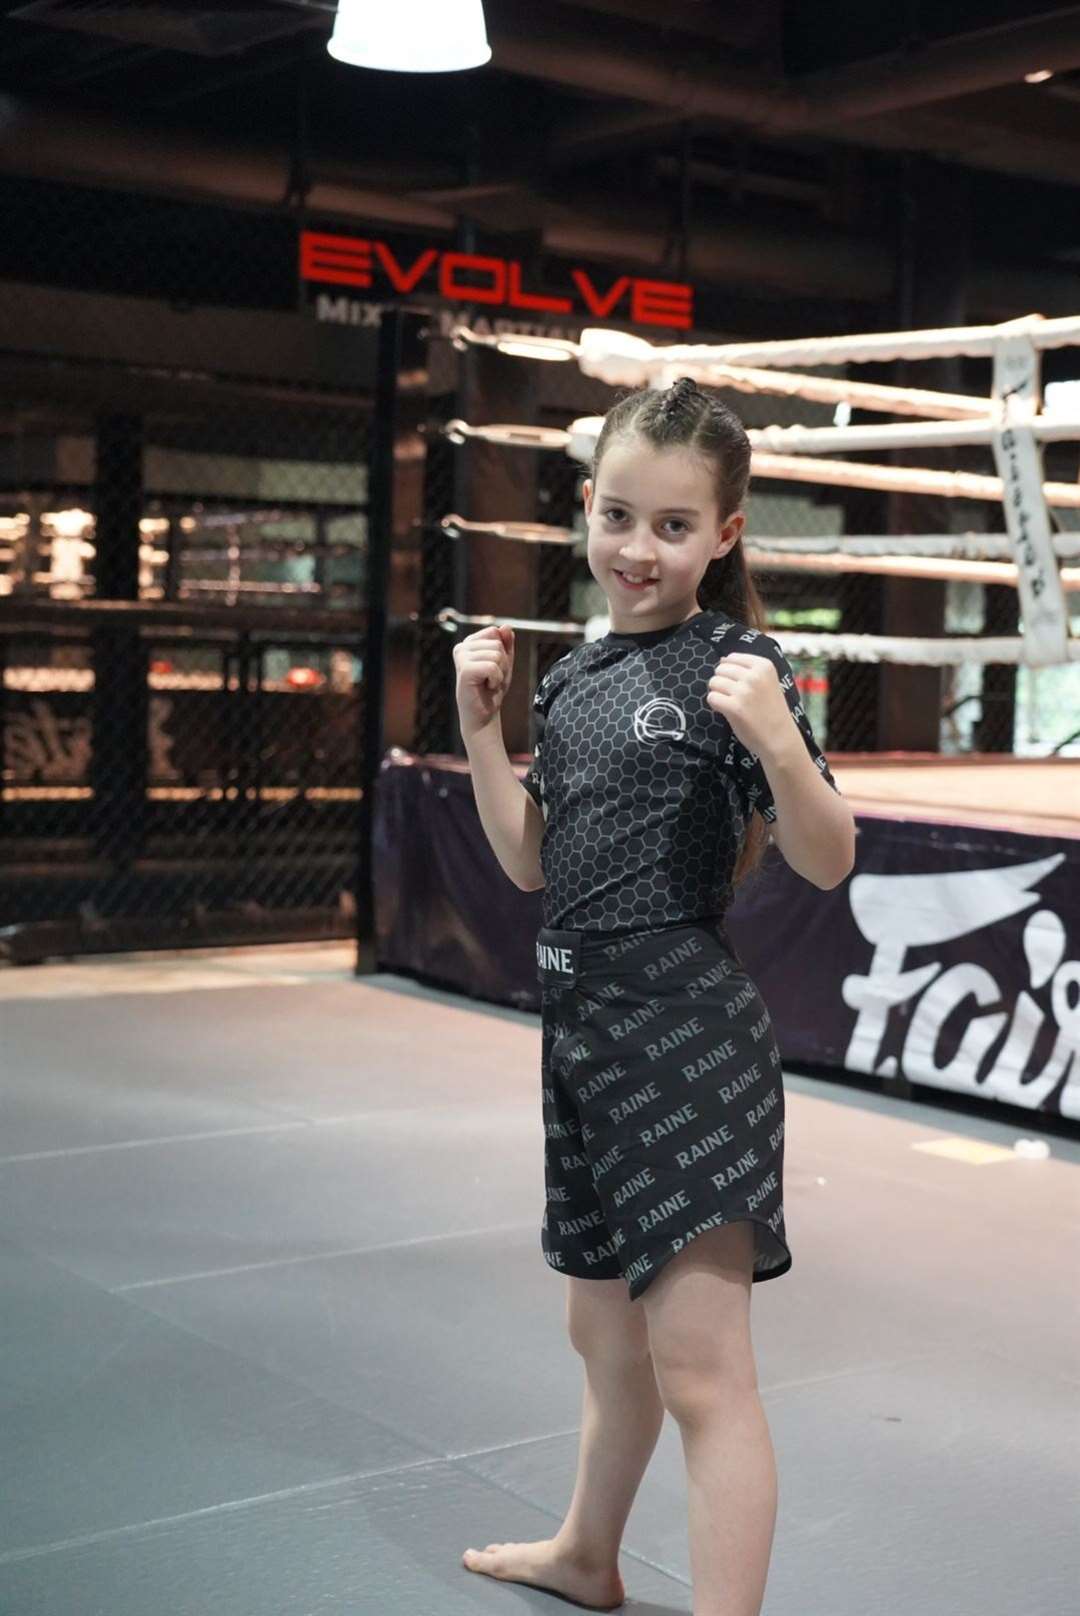 One of Niamh Ross' highlights from the trip was the opportunity to train at the Evolve MMA gym, which is home to a multitude of world champions.